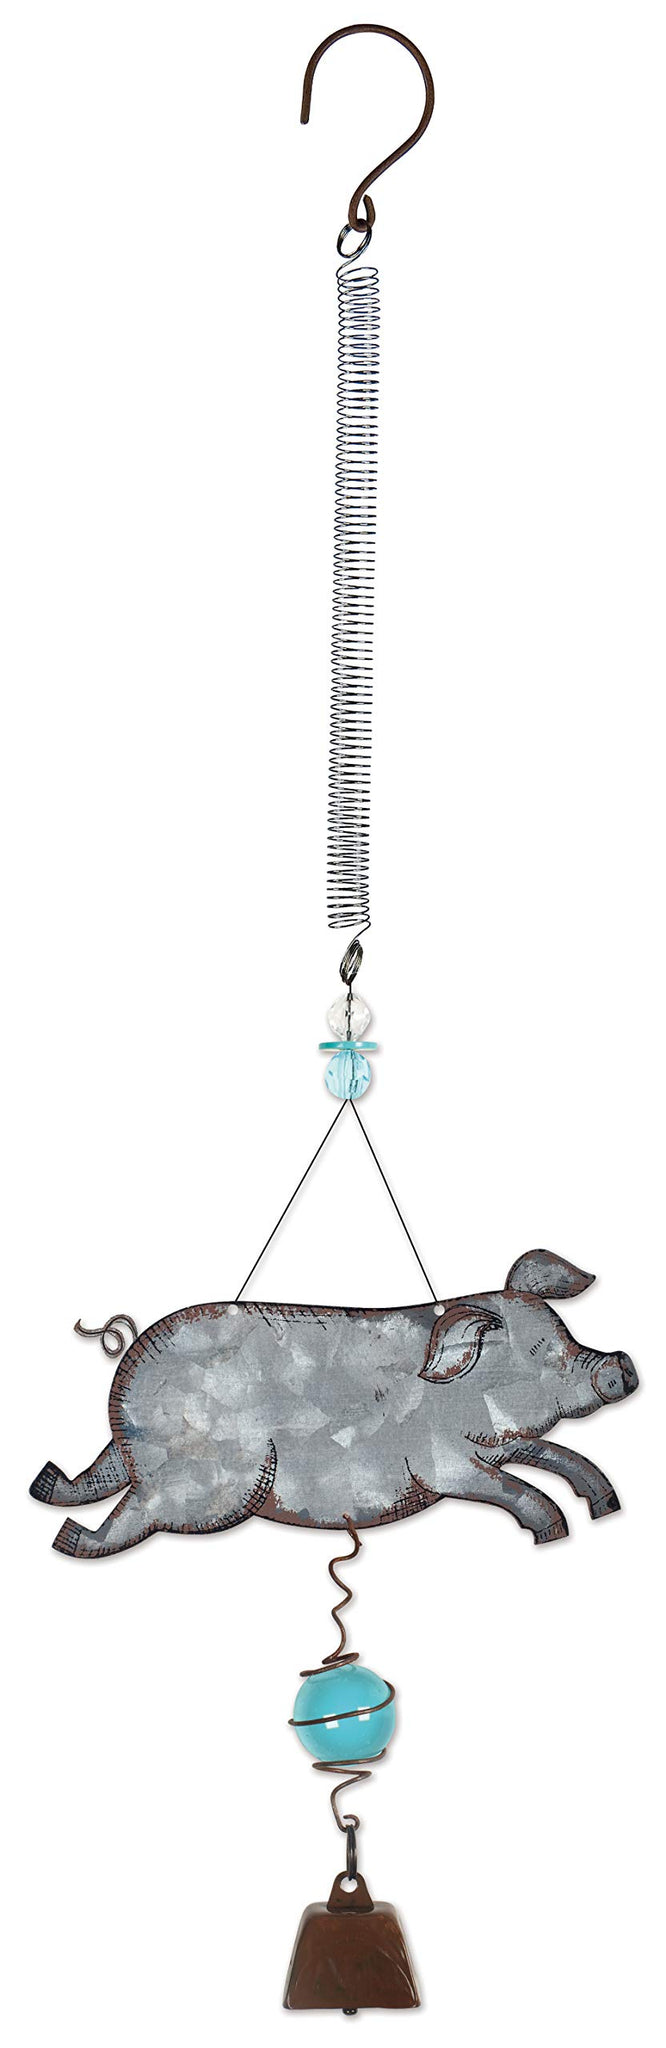 Pig Bouncy Hanging Garden Decoration with Mini Cowbell by Sunset Vista Designs